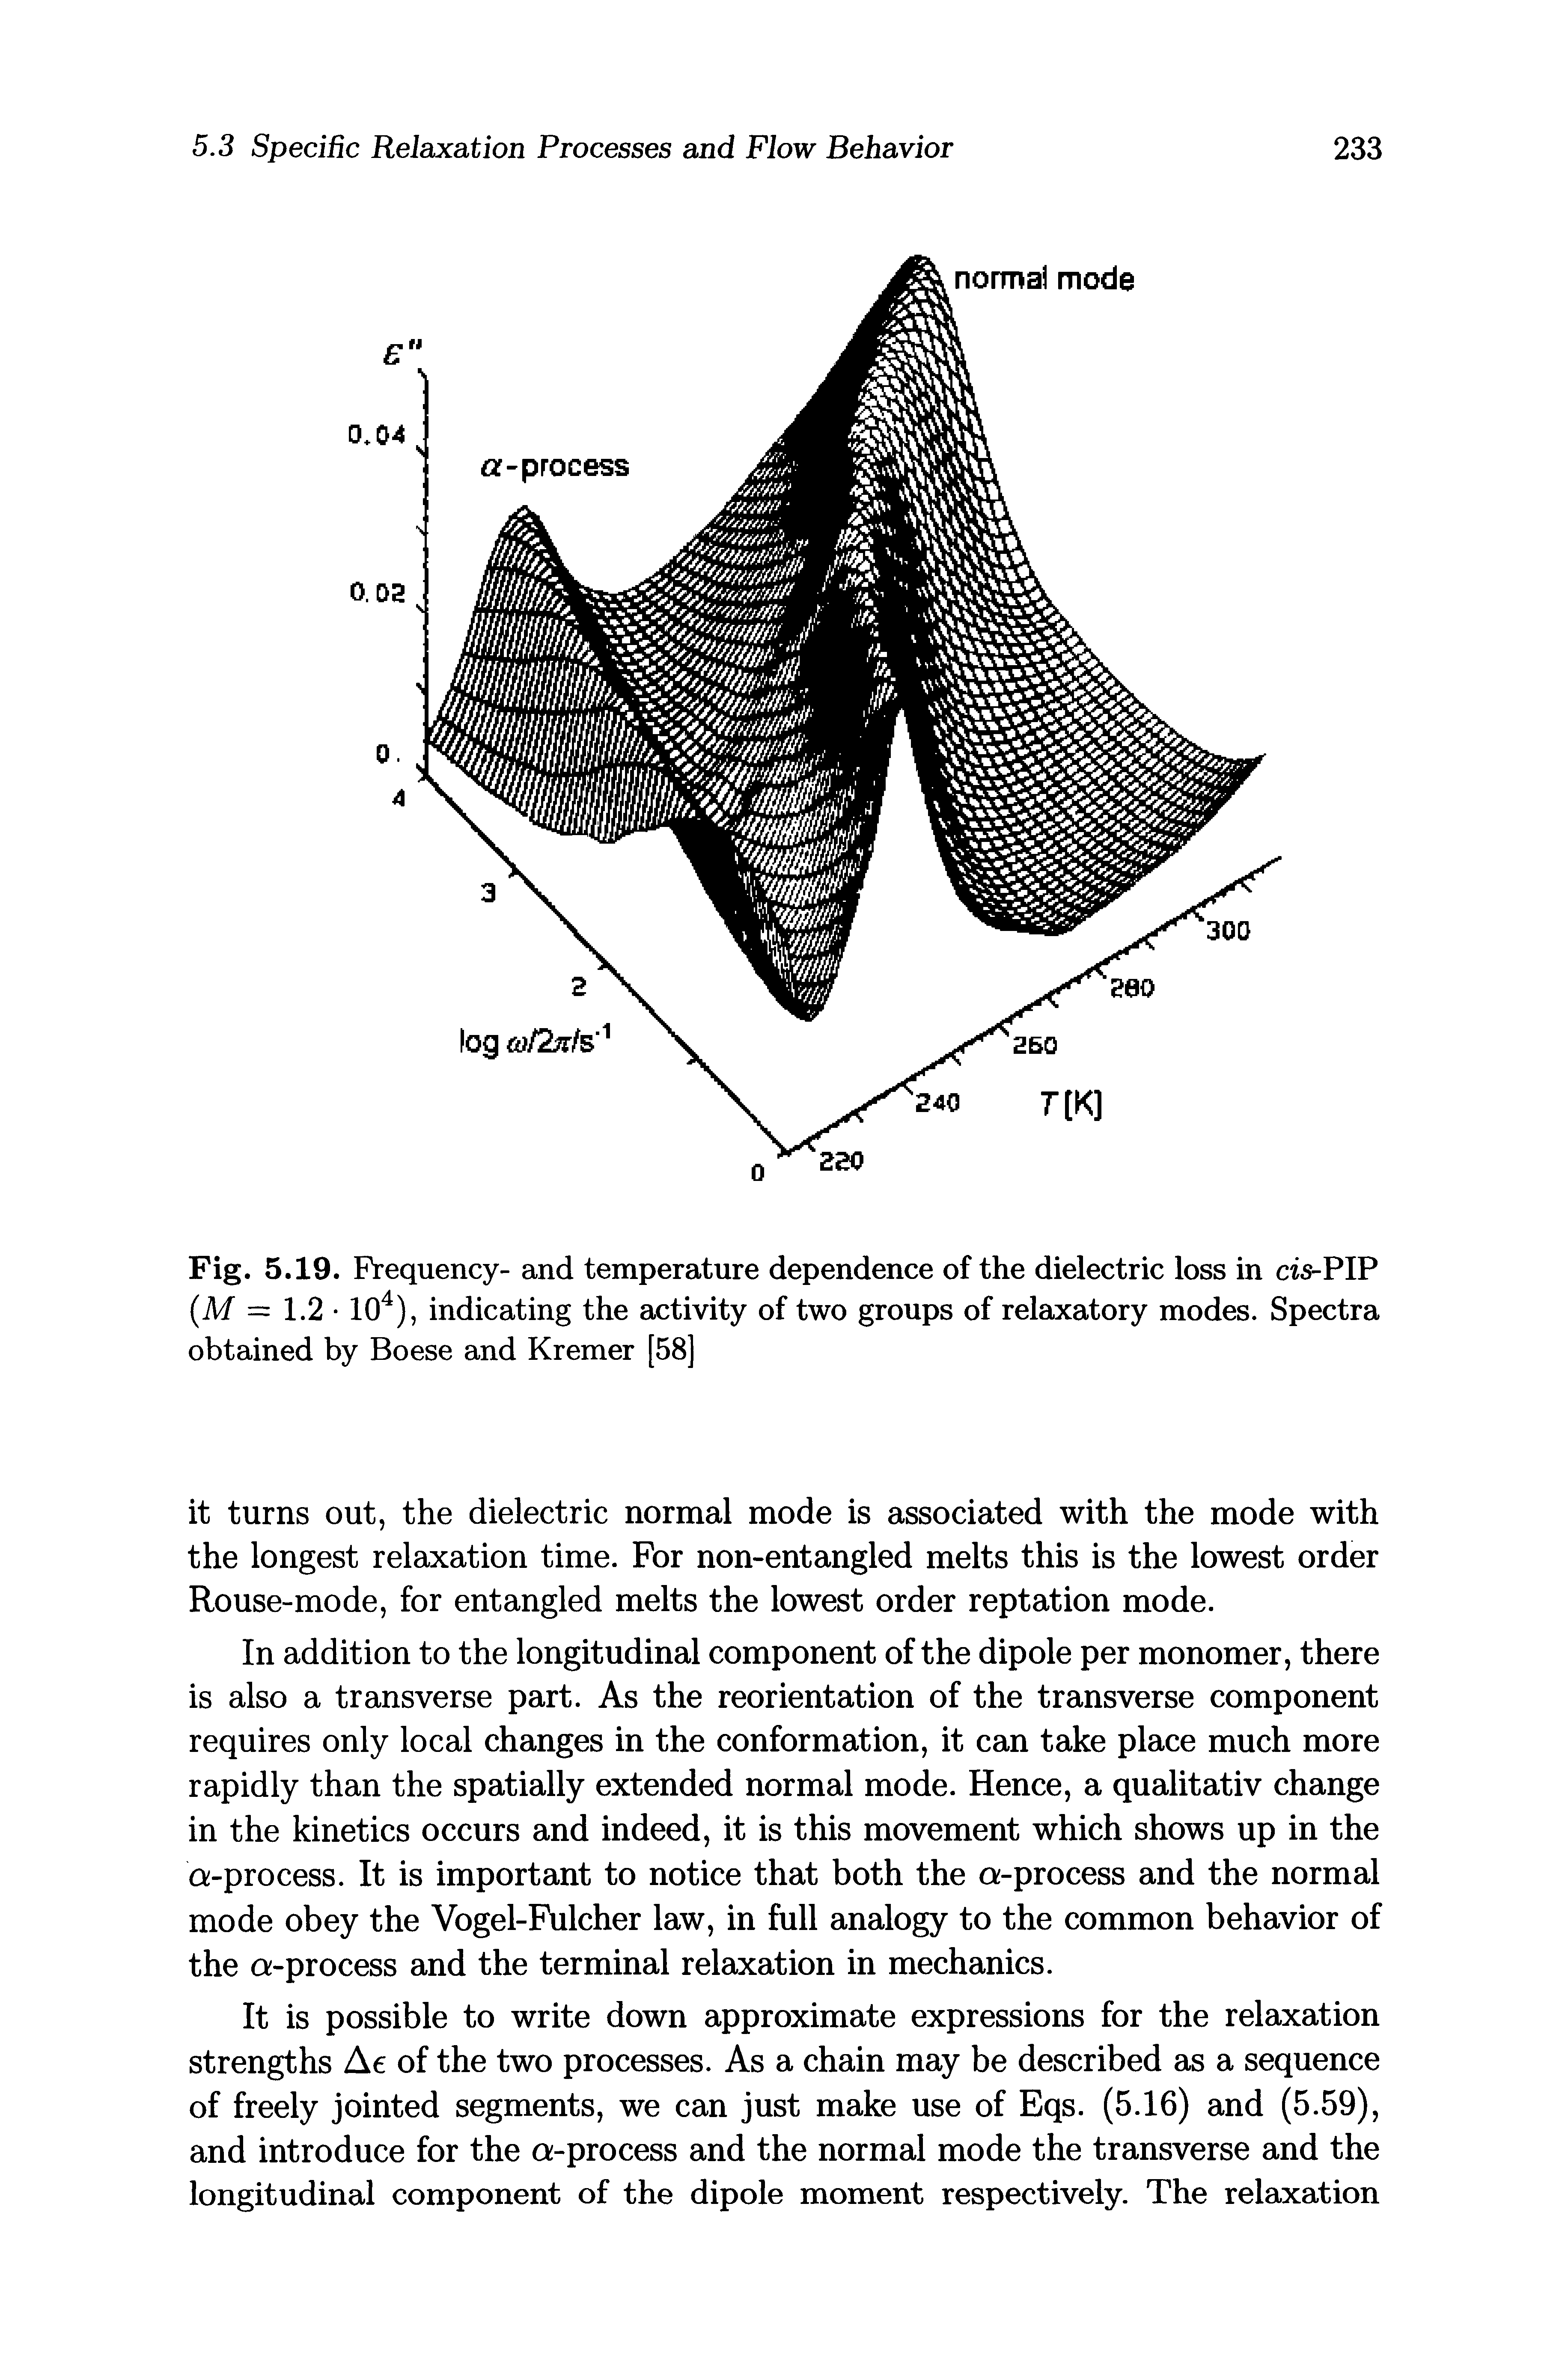 Fig. 5.19. Frequency- and temperature dependence of the dielectric loss in cis-PIP (M = 1.2 10 ), indicating the activity of two groups of relaxatory modes. Spectra obtained by Boese and Kremer [58]...